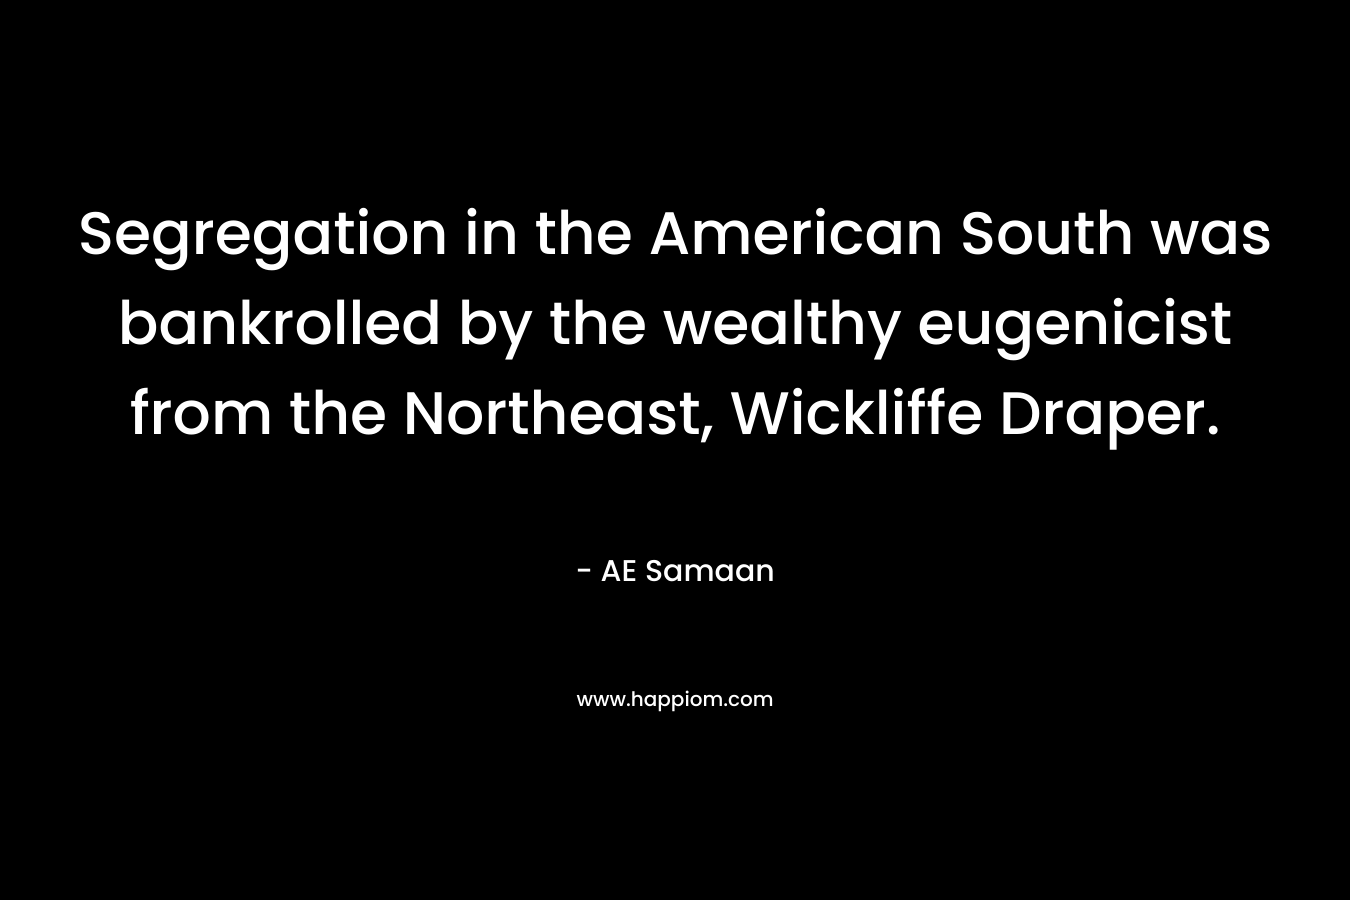 Segregation in the American South was bankrolled by the wealthy eugenicist from the Northeast, Wickliffe Draper. – AE Samaan